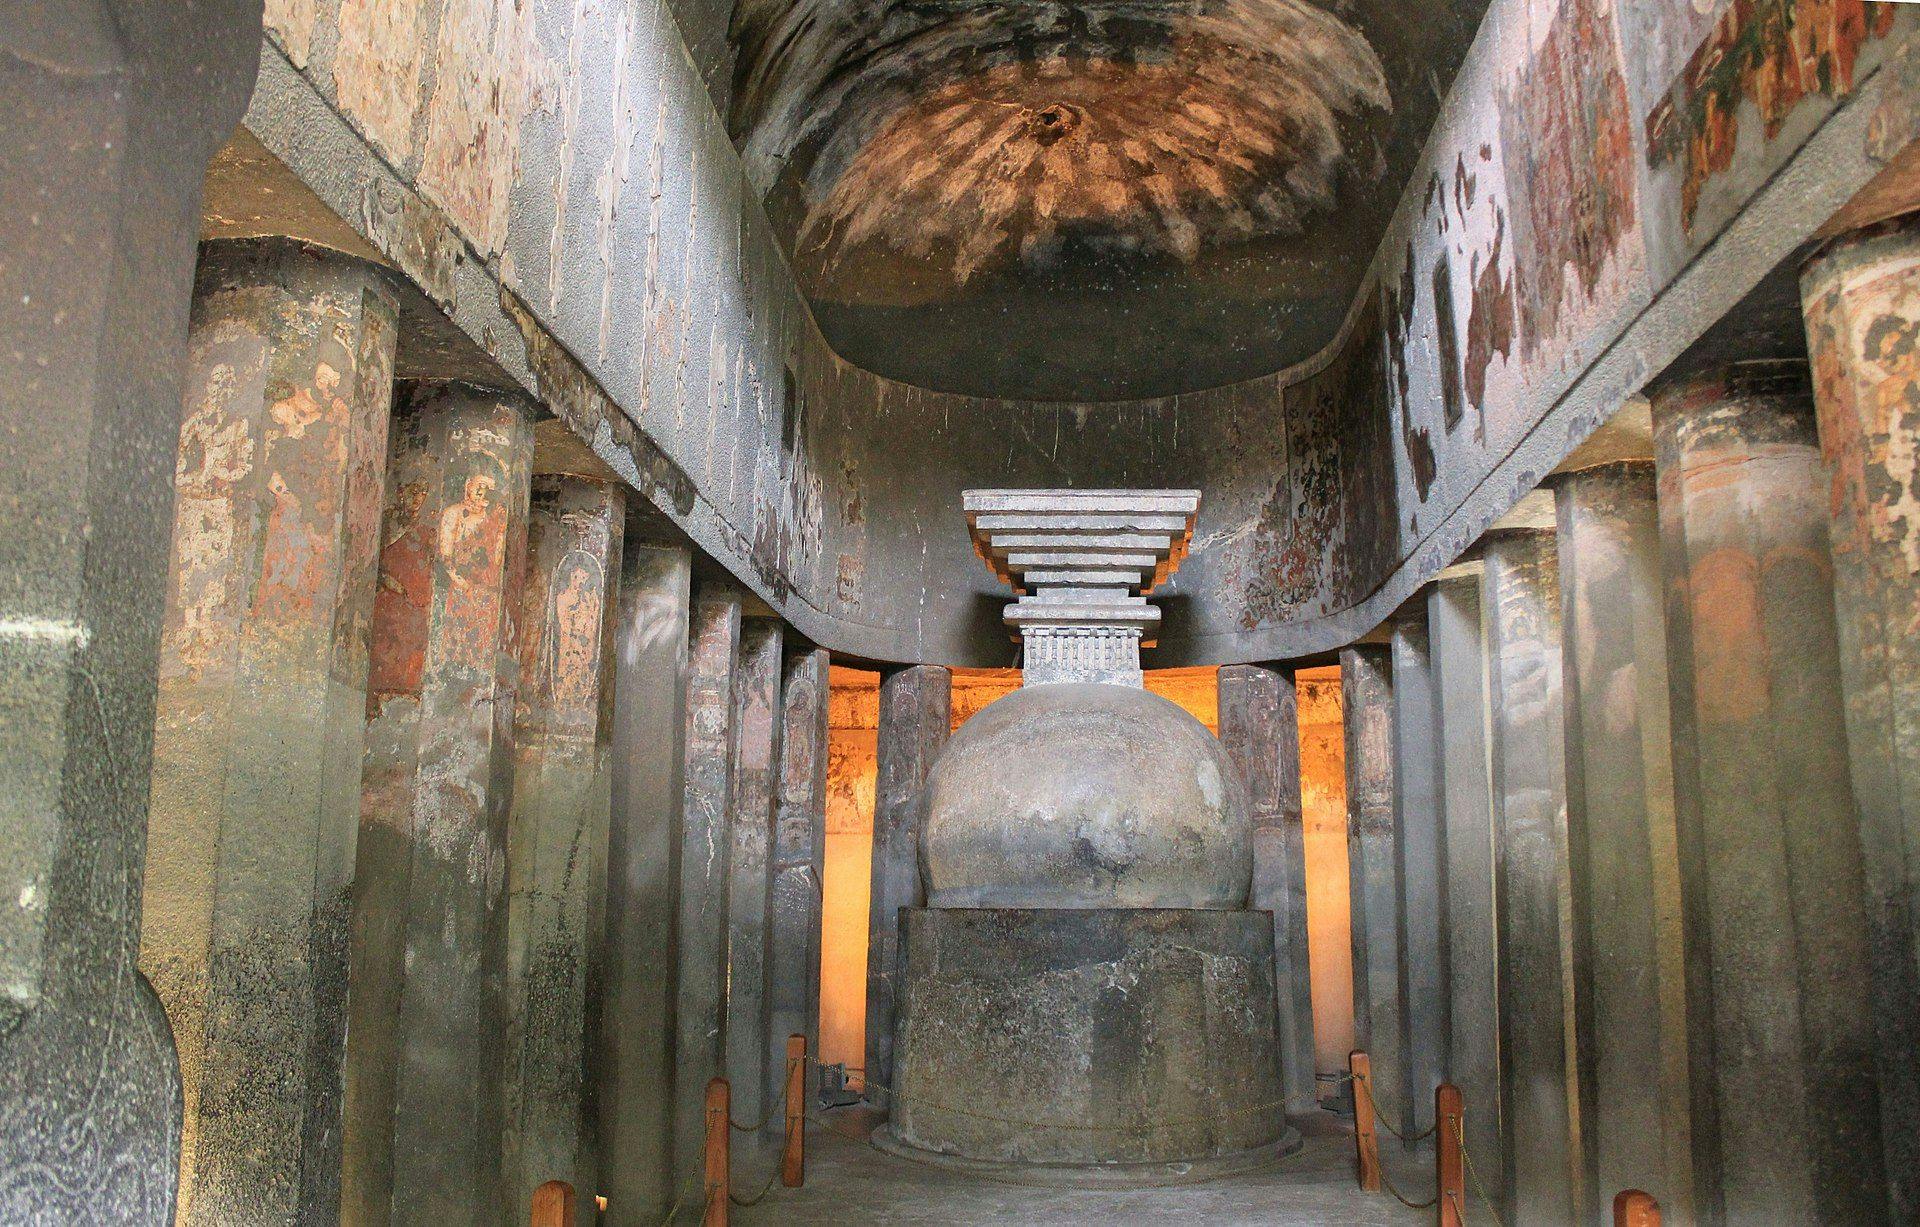 The apsidal hall with plain hemispherical stupa at apse’s center, Cave 10